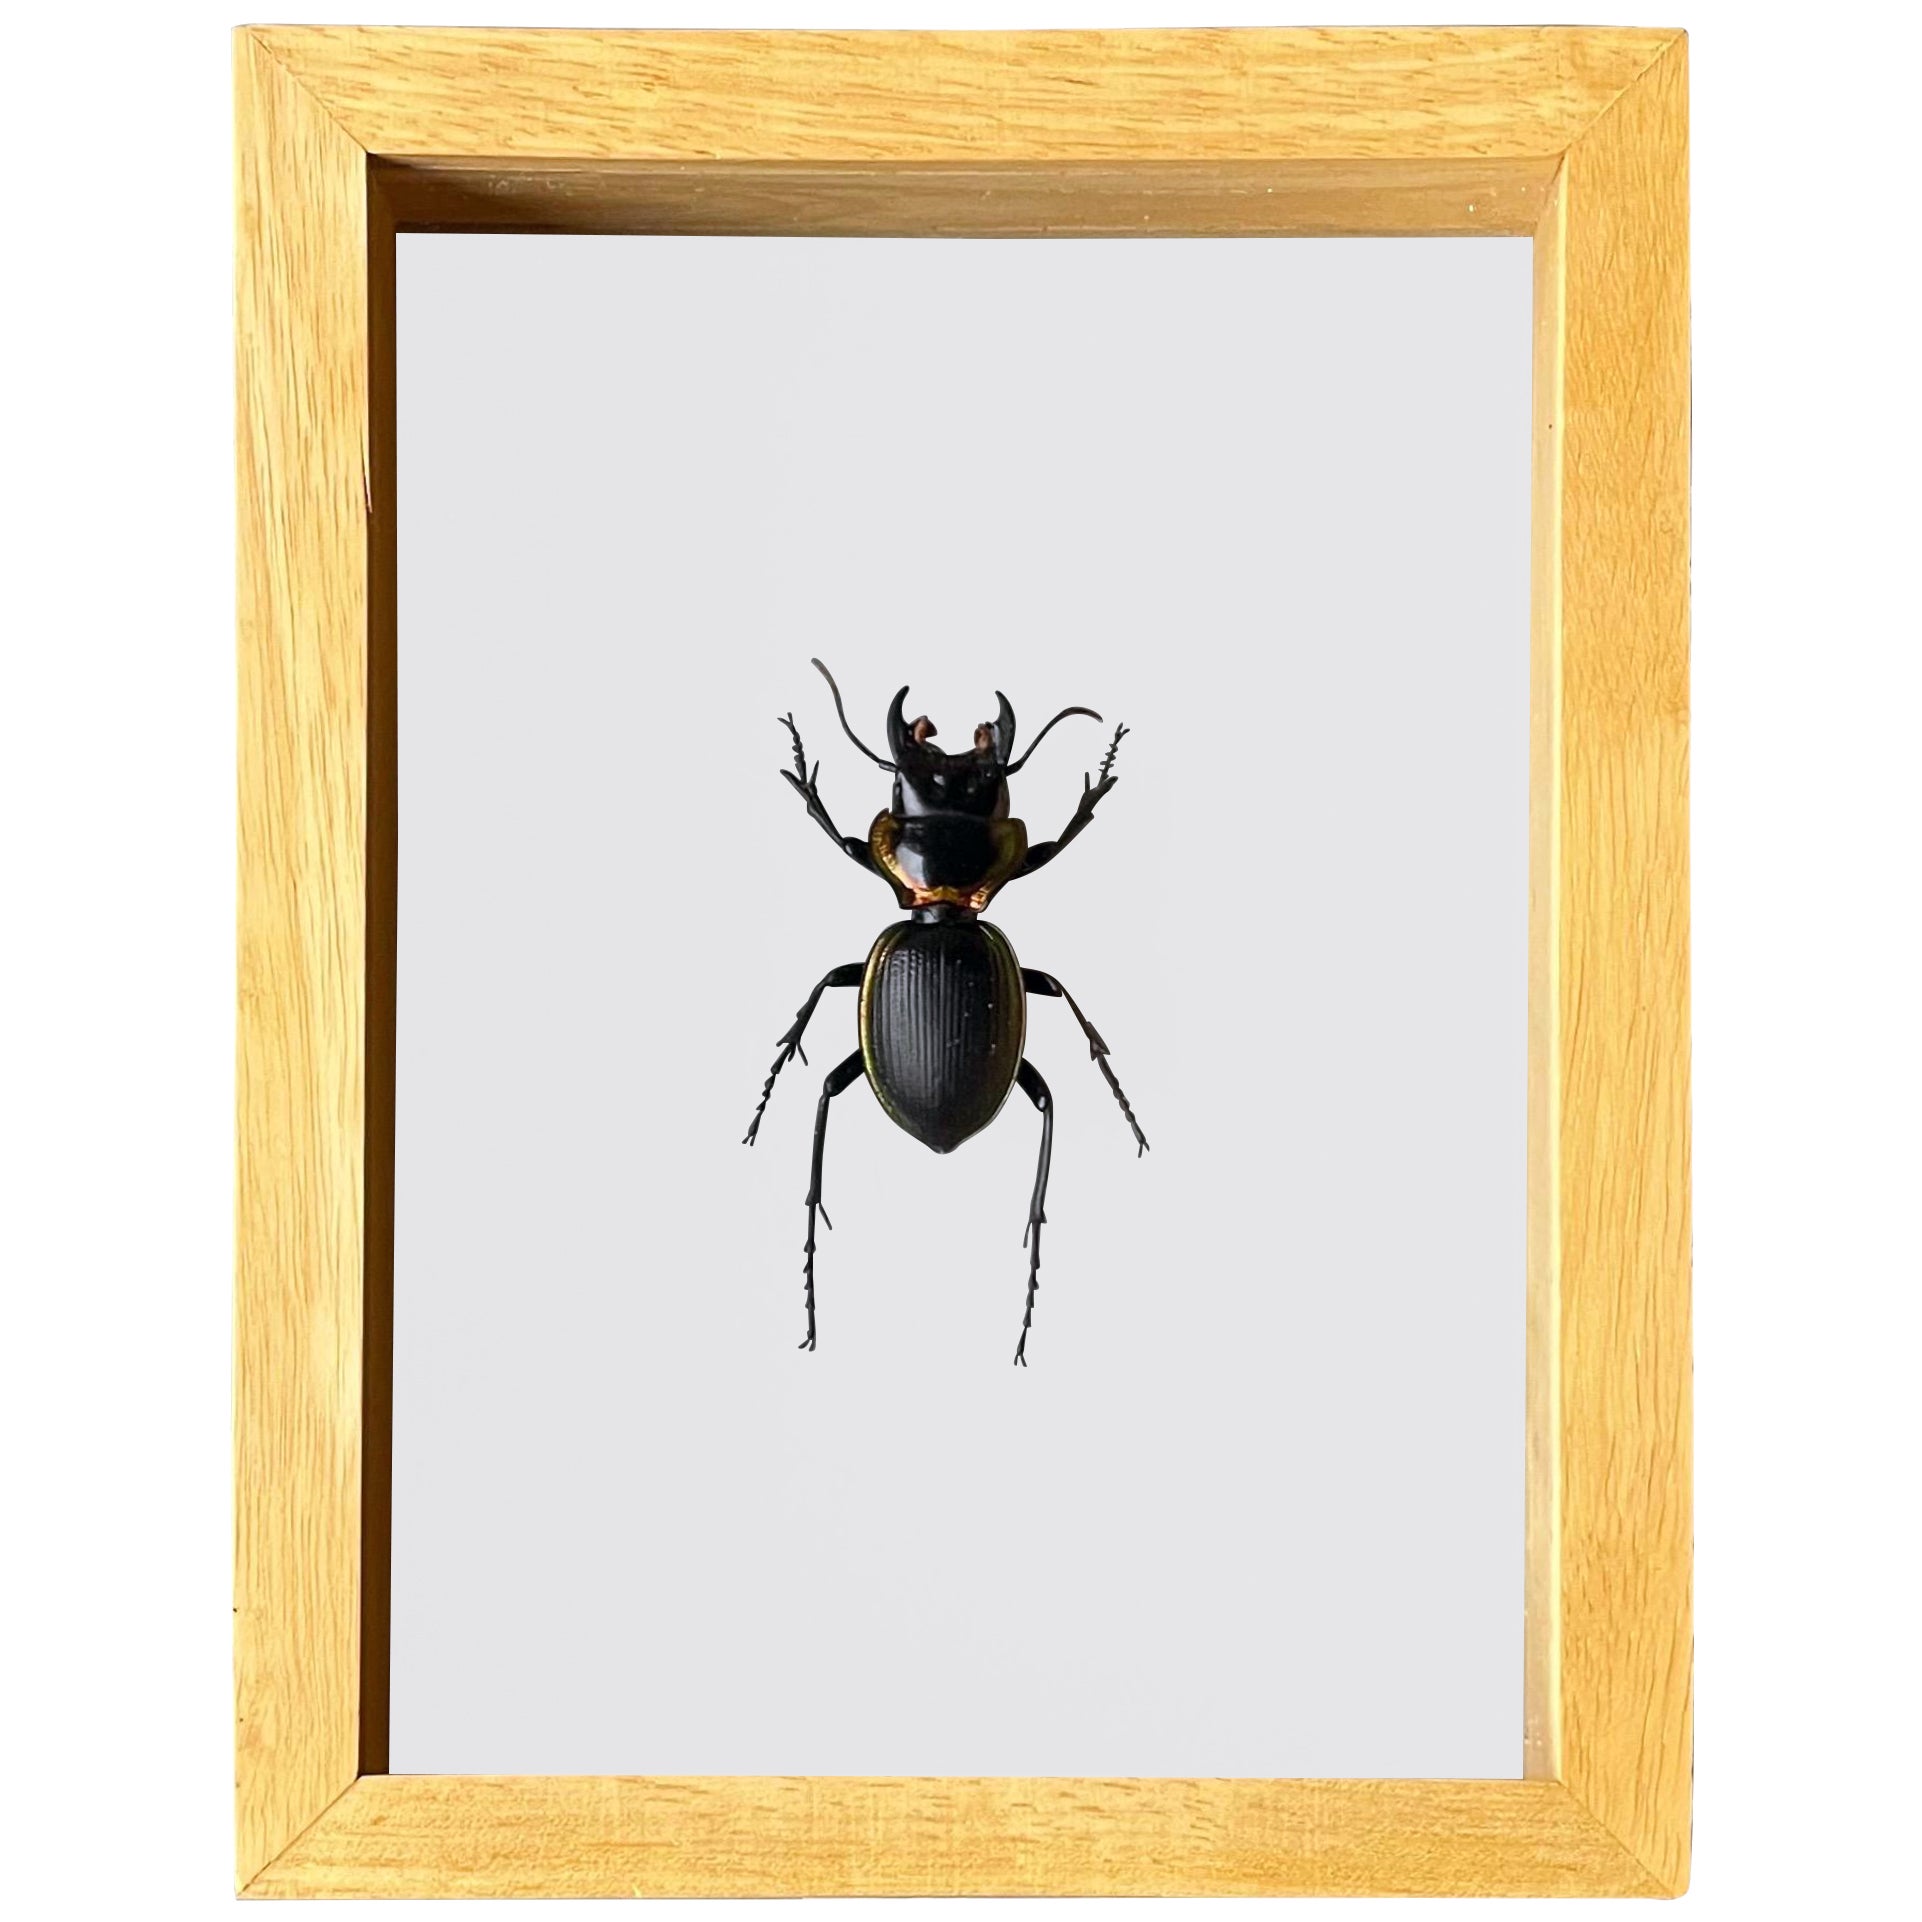 Authentic "Mouhotia Planipennis" Beetle Taxidermy Sculpture For Sale